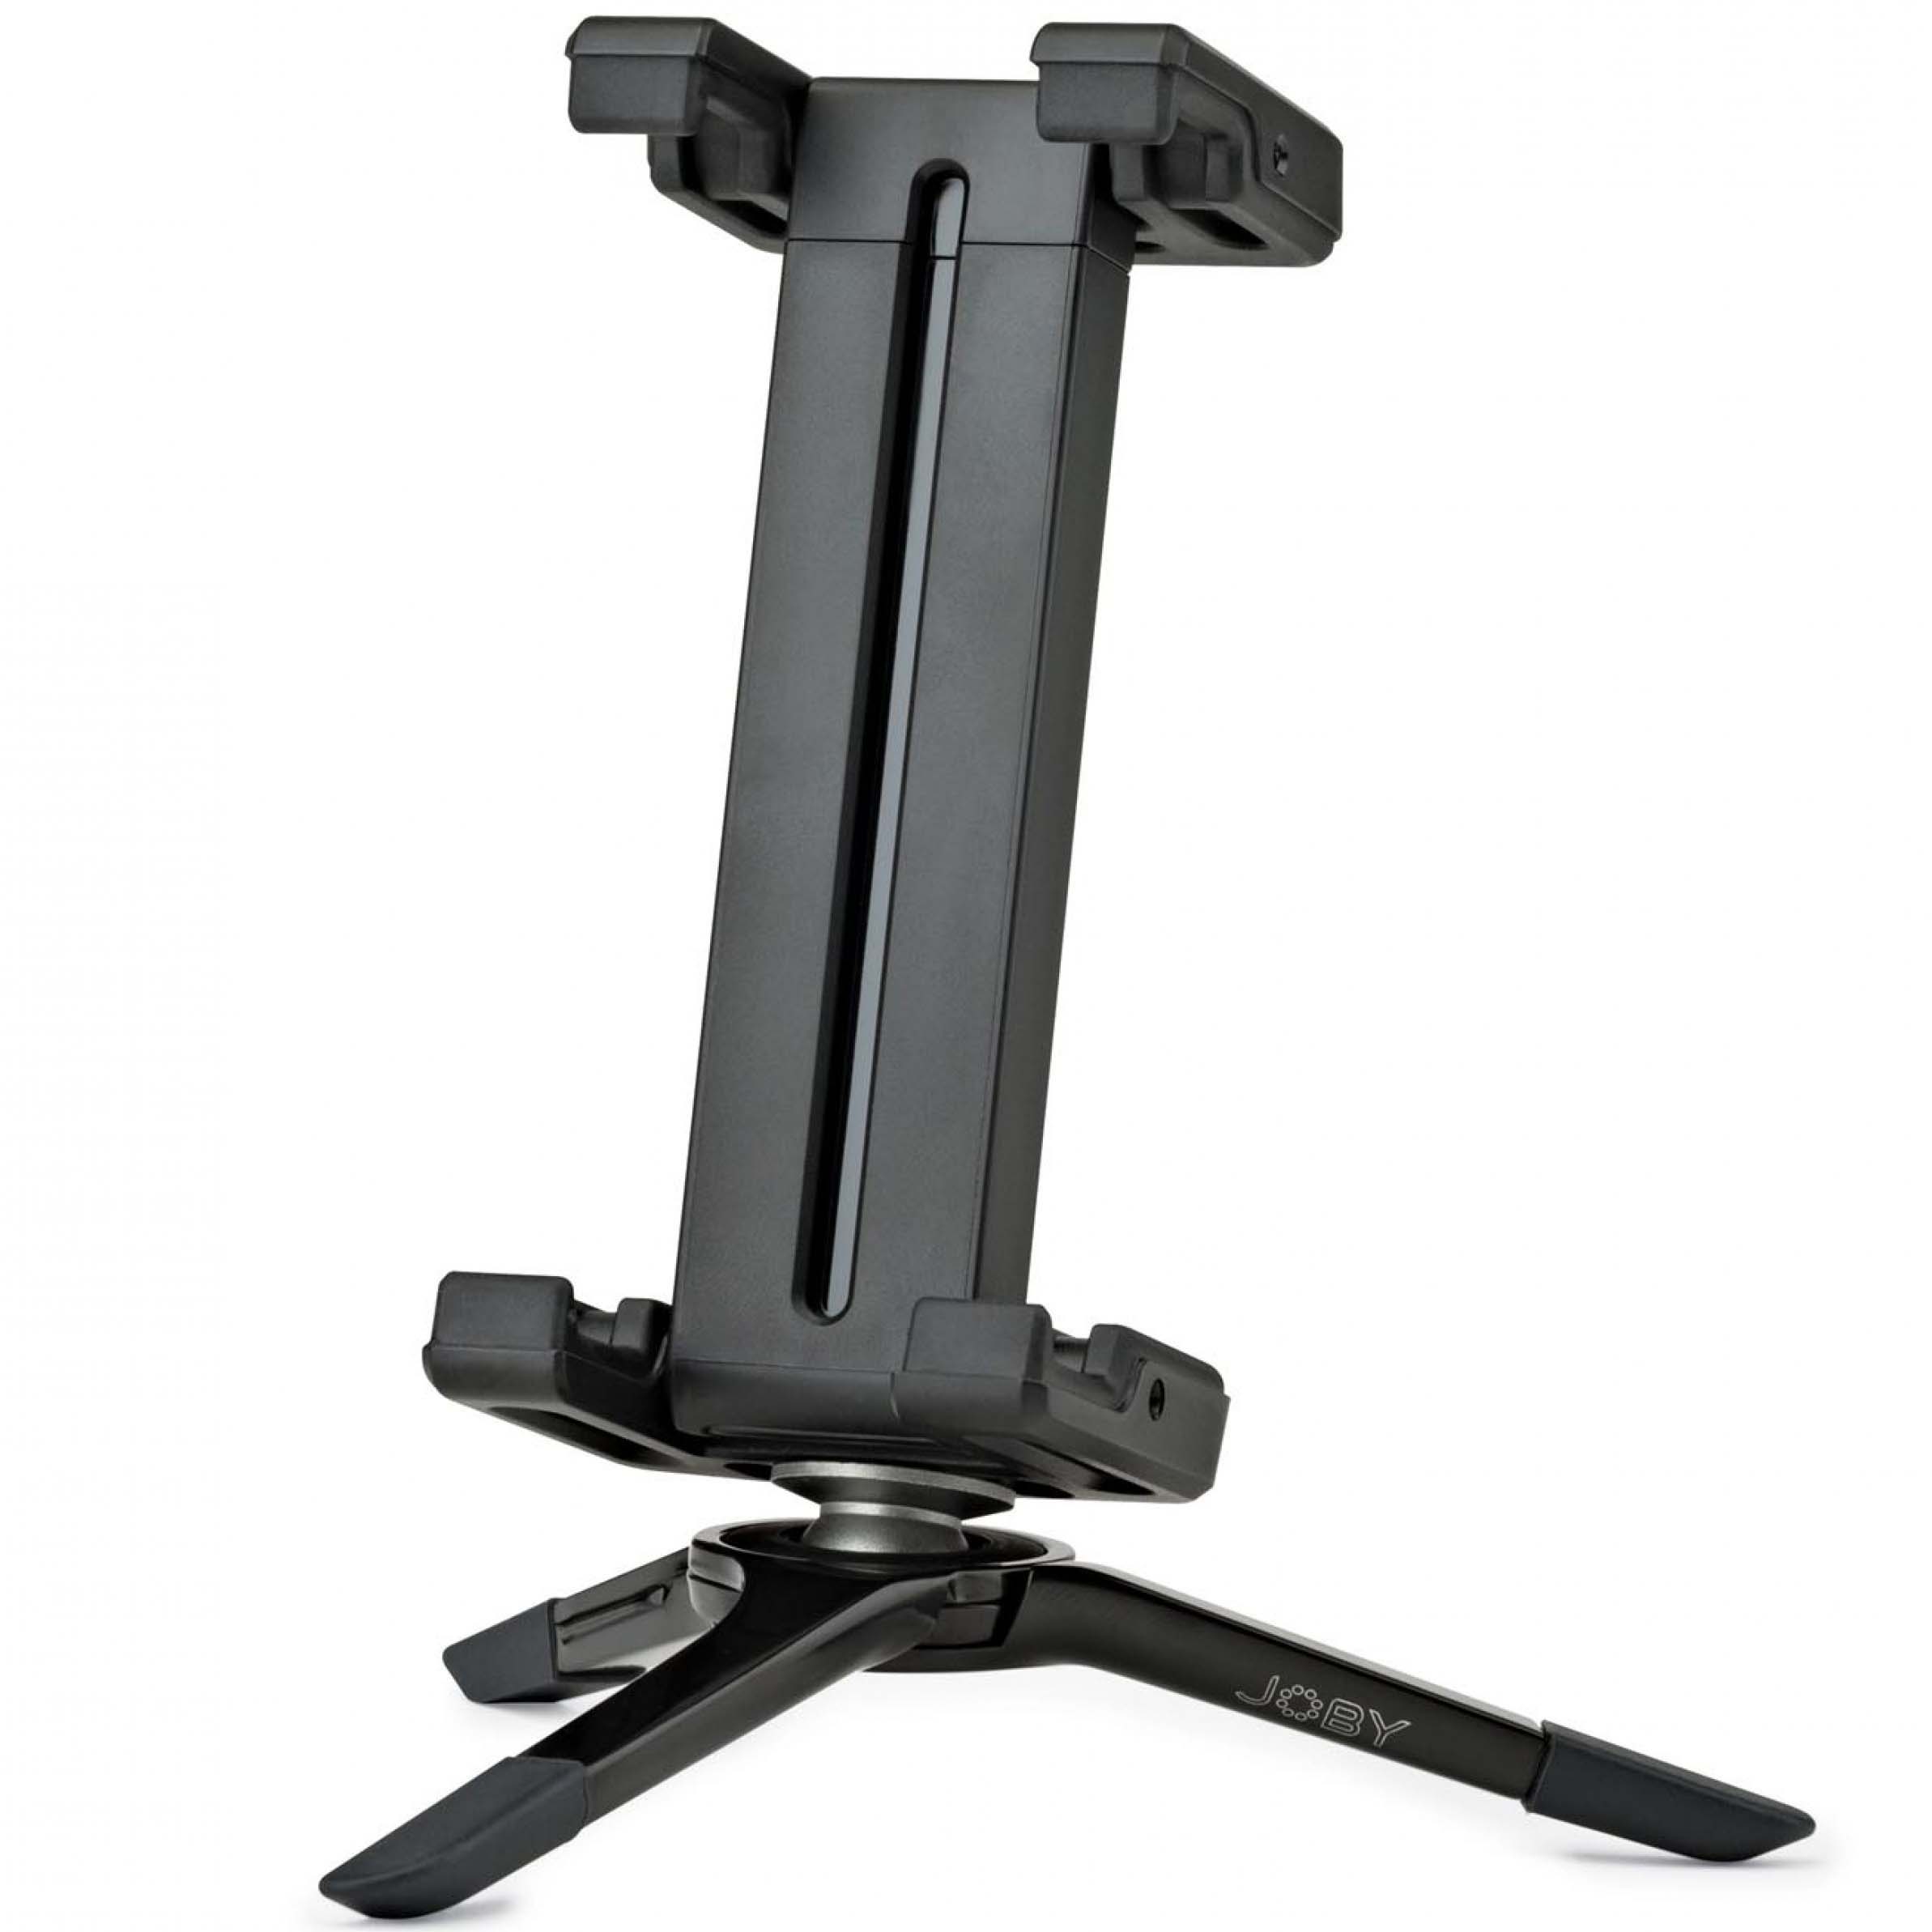 SOPORTE JOBY GRIPTIGHT MICRO STAND FOR SMALLER TABLES + PIE JOBY 